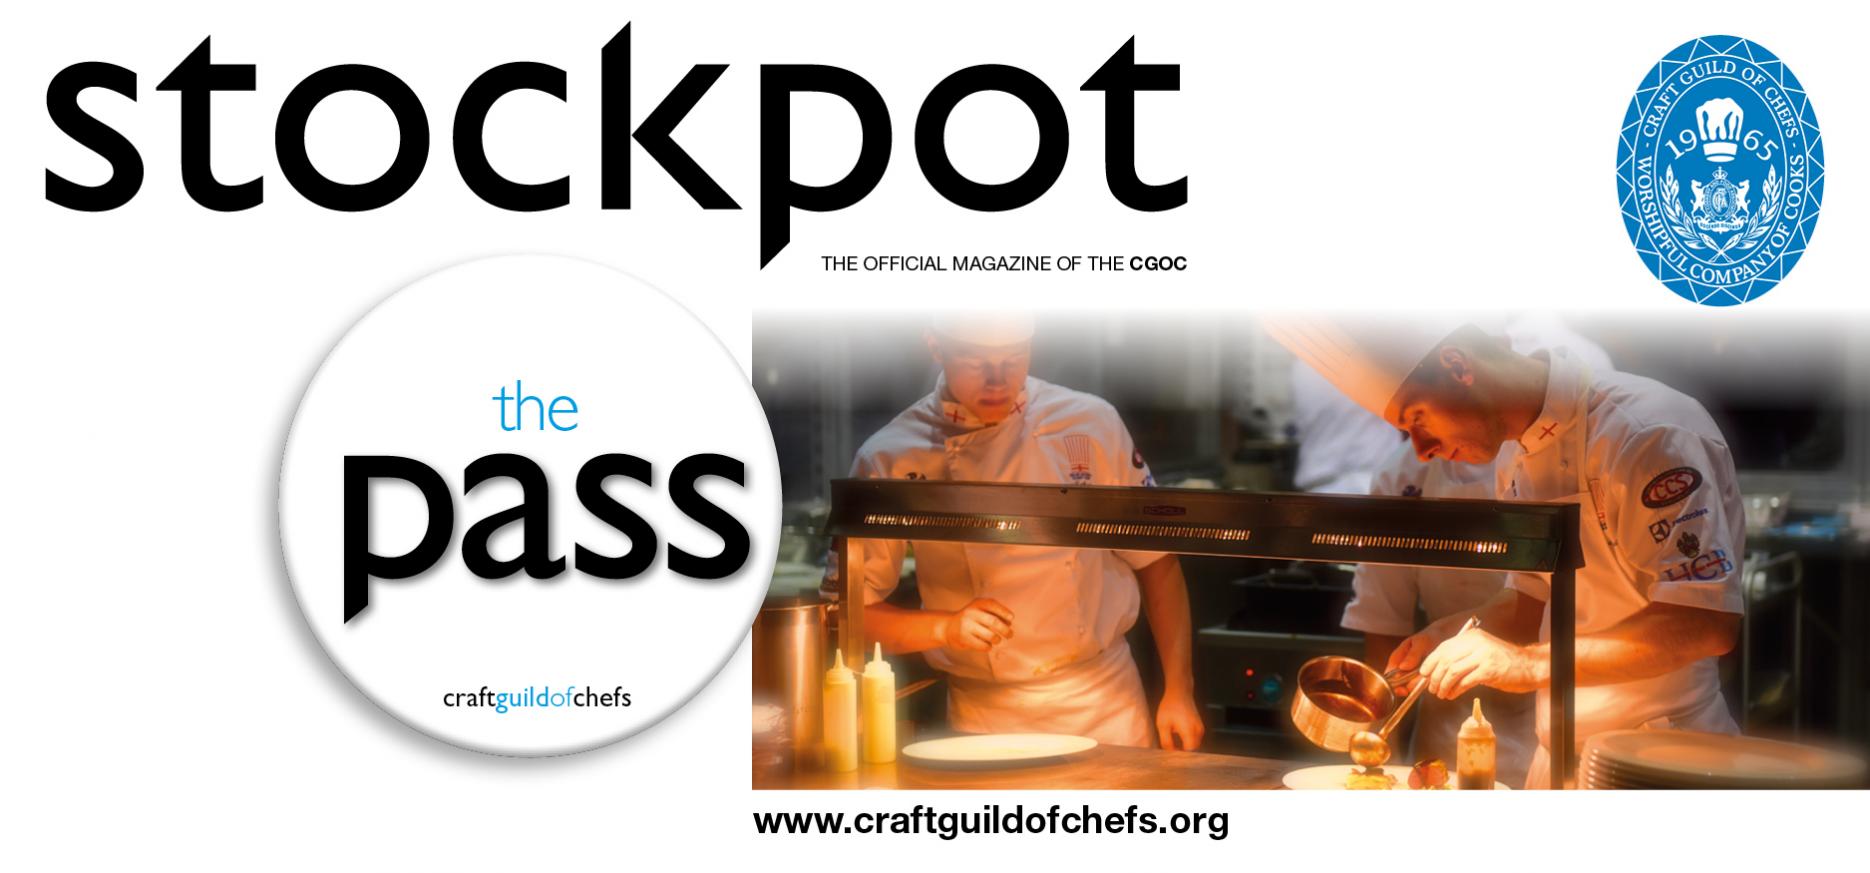 Craft Guild of Chefs launches e-newsletter